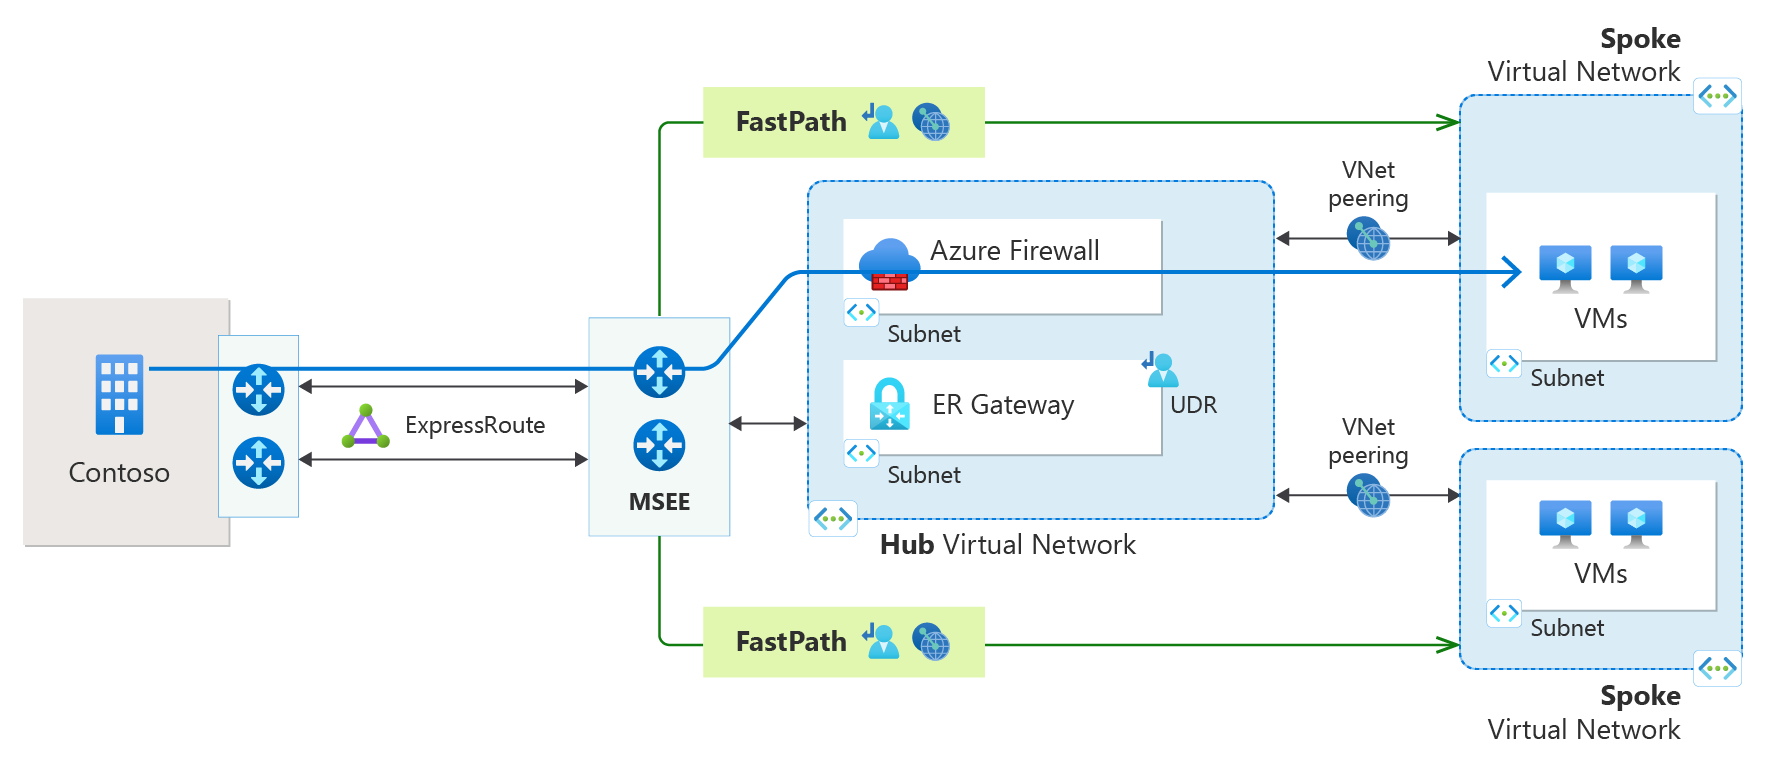 Diagram of an ExpressRoute connection with Fastpath and virtual network peering.